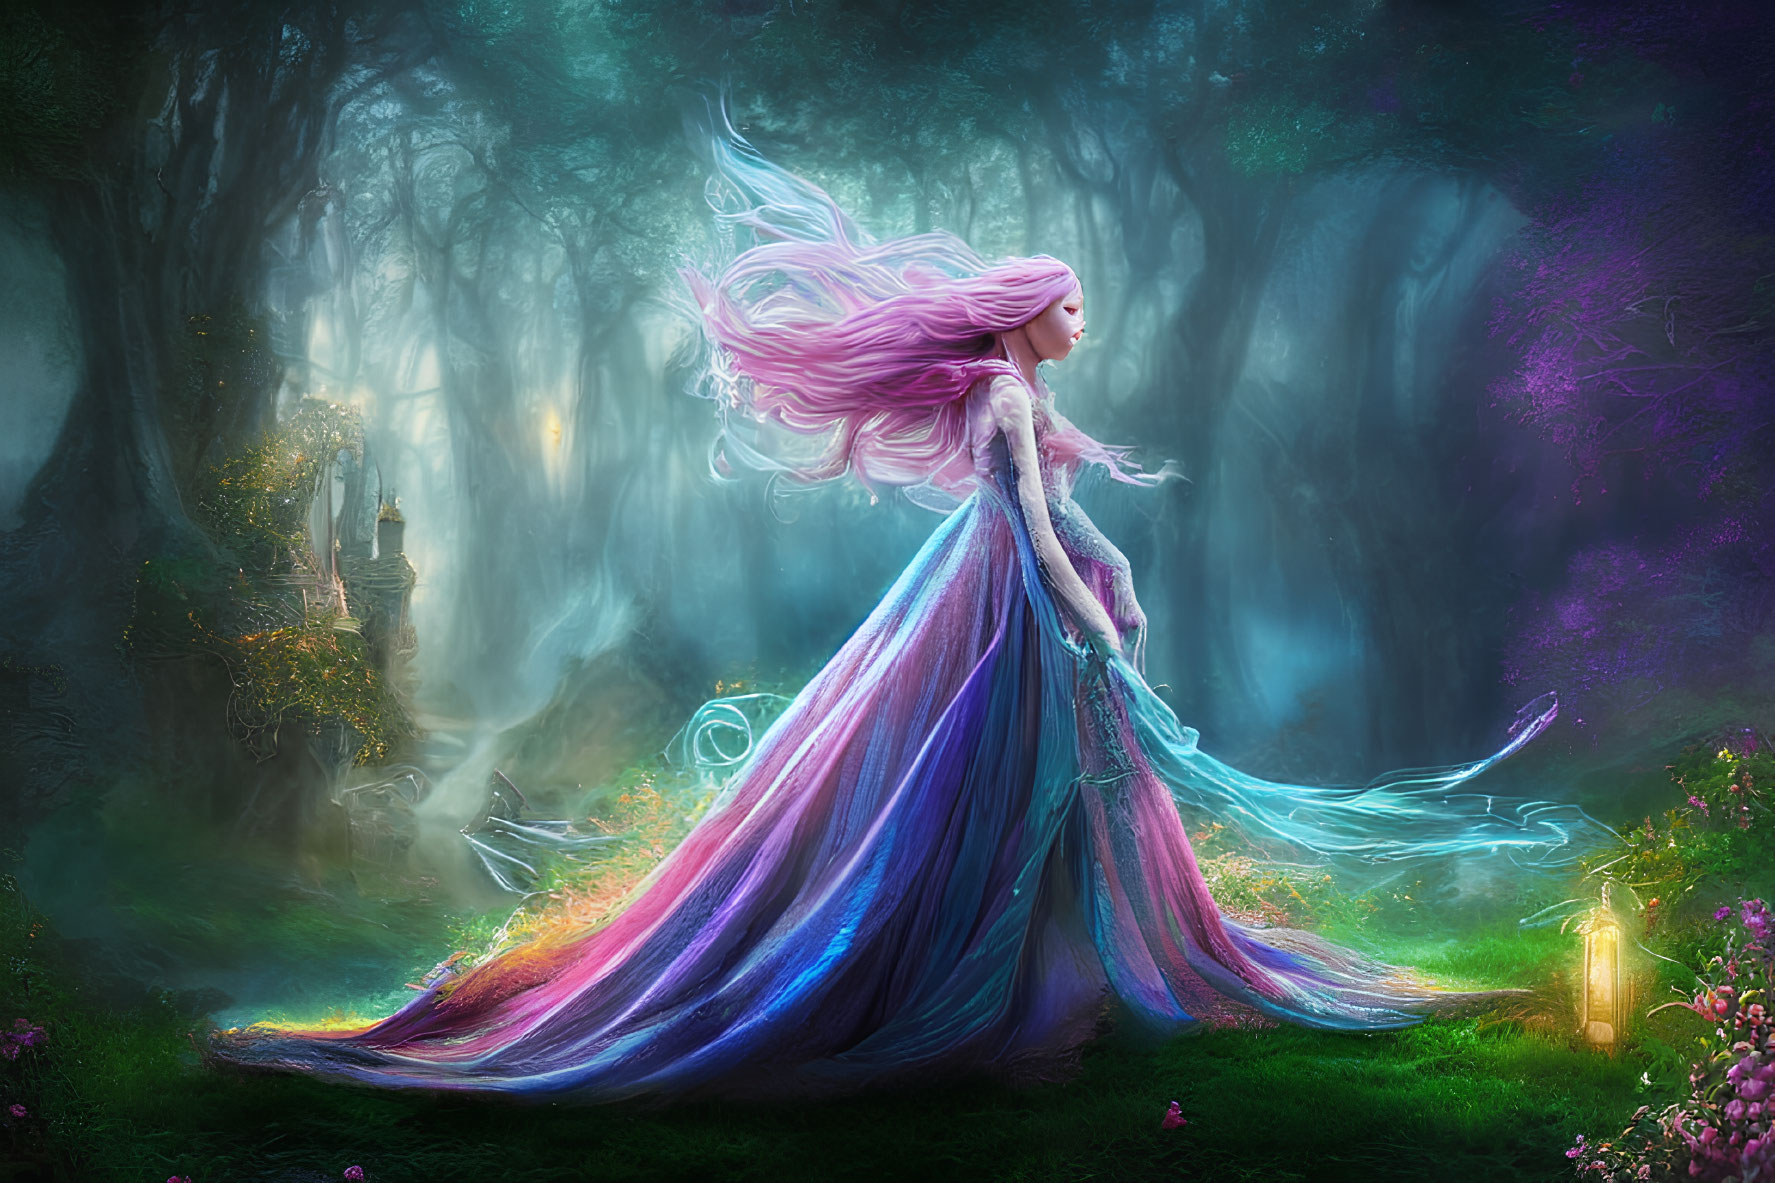 Ethereal woman with pink hair in mystical forest